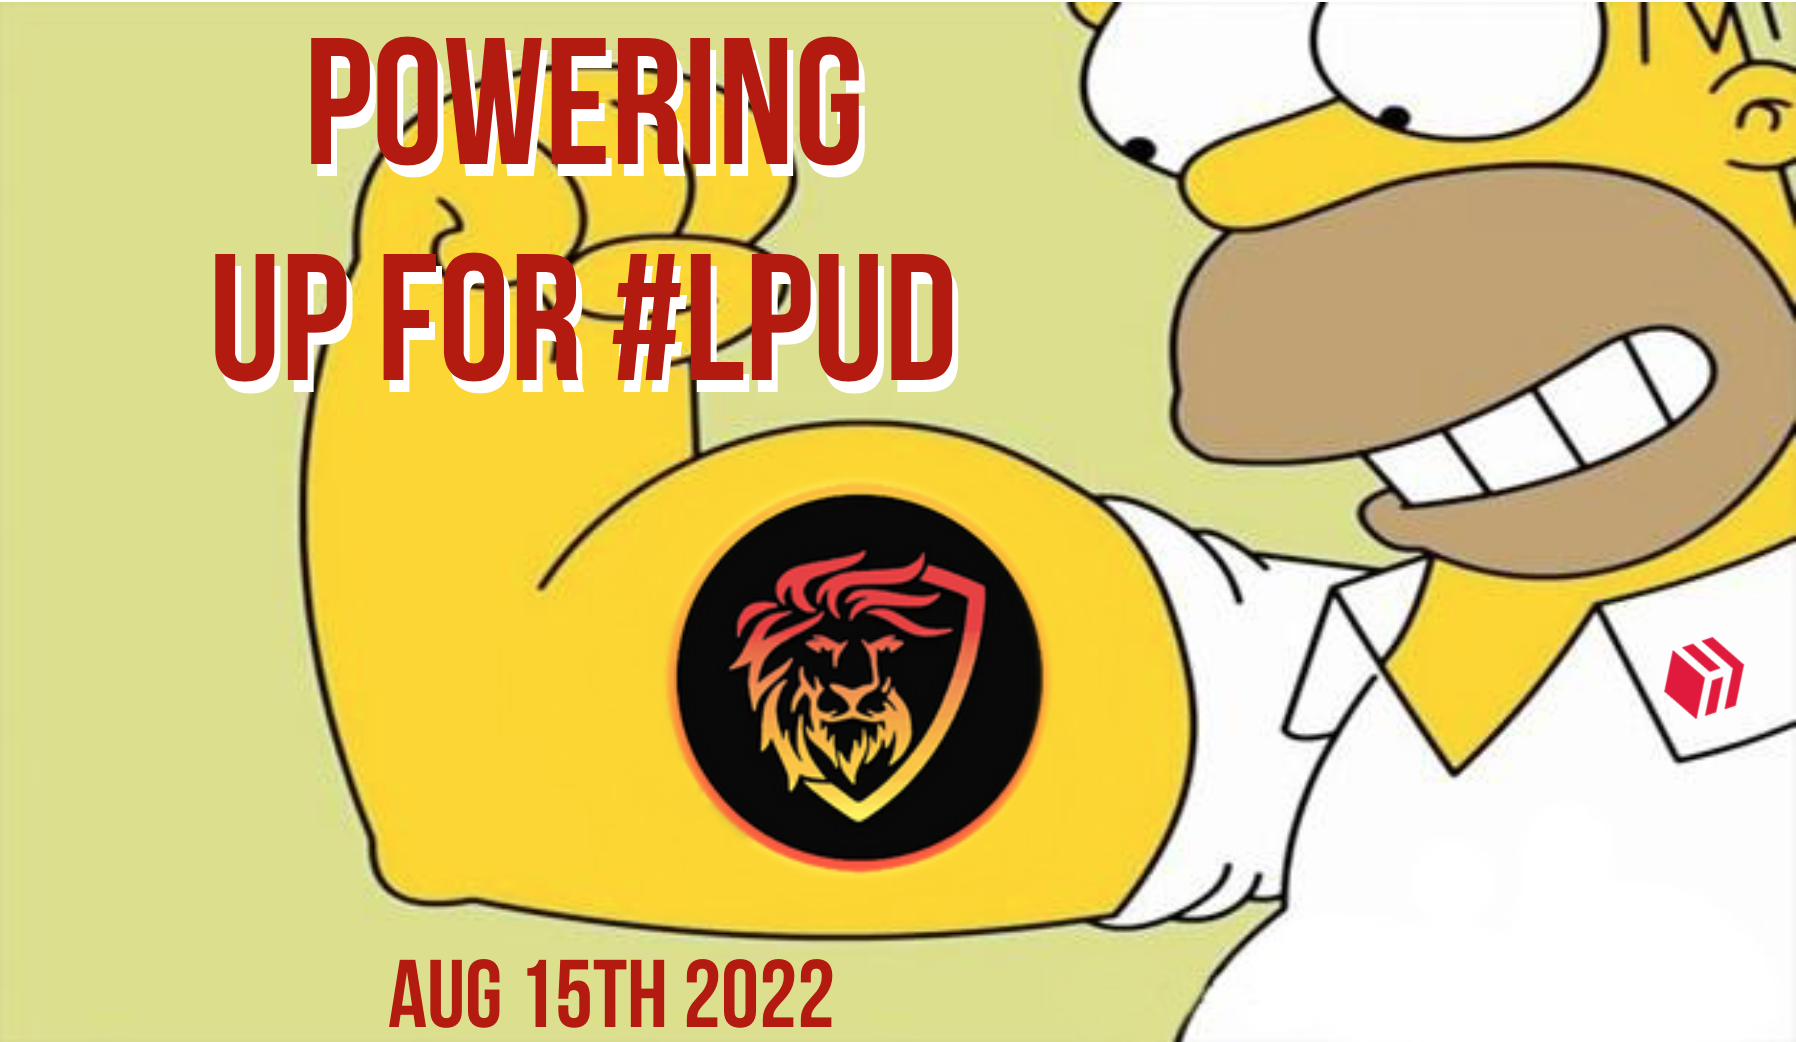 @alex-rourke/powering-up-for-aug-15th-lpud